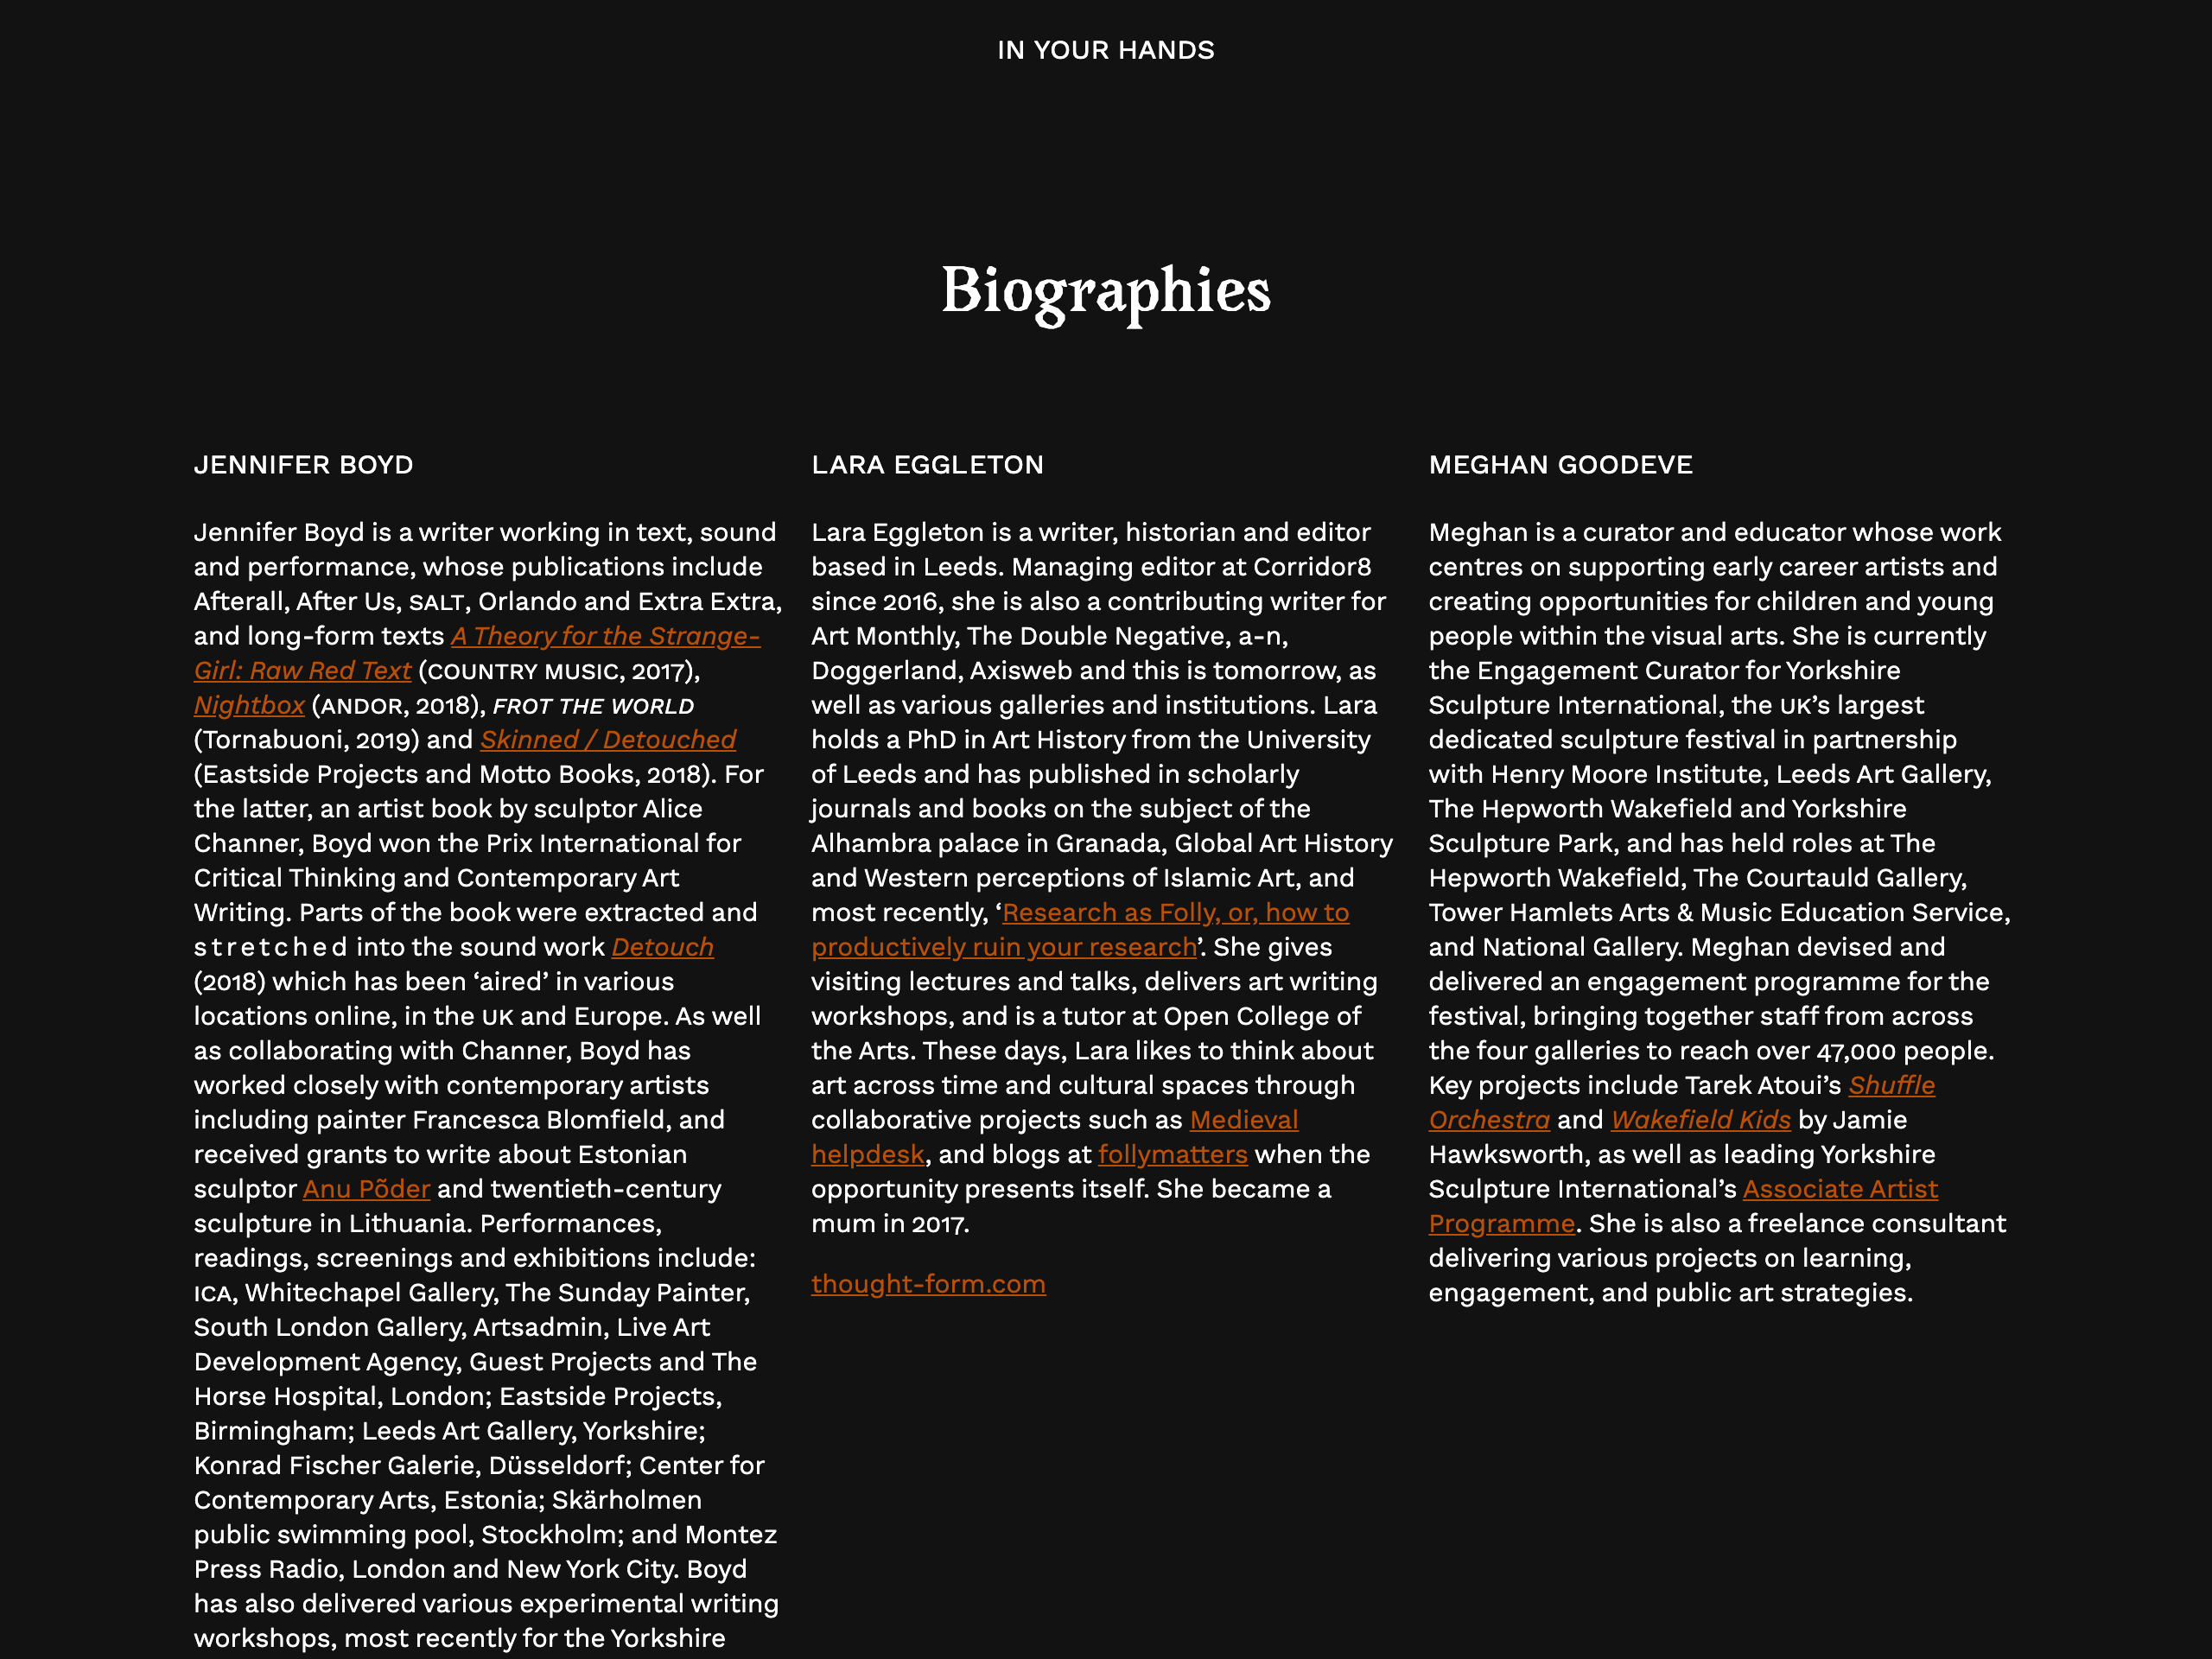 Biographies page